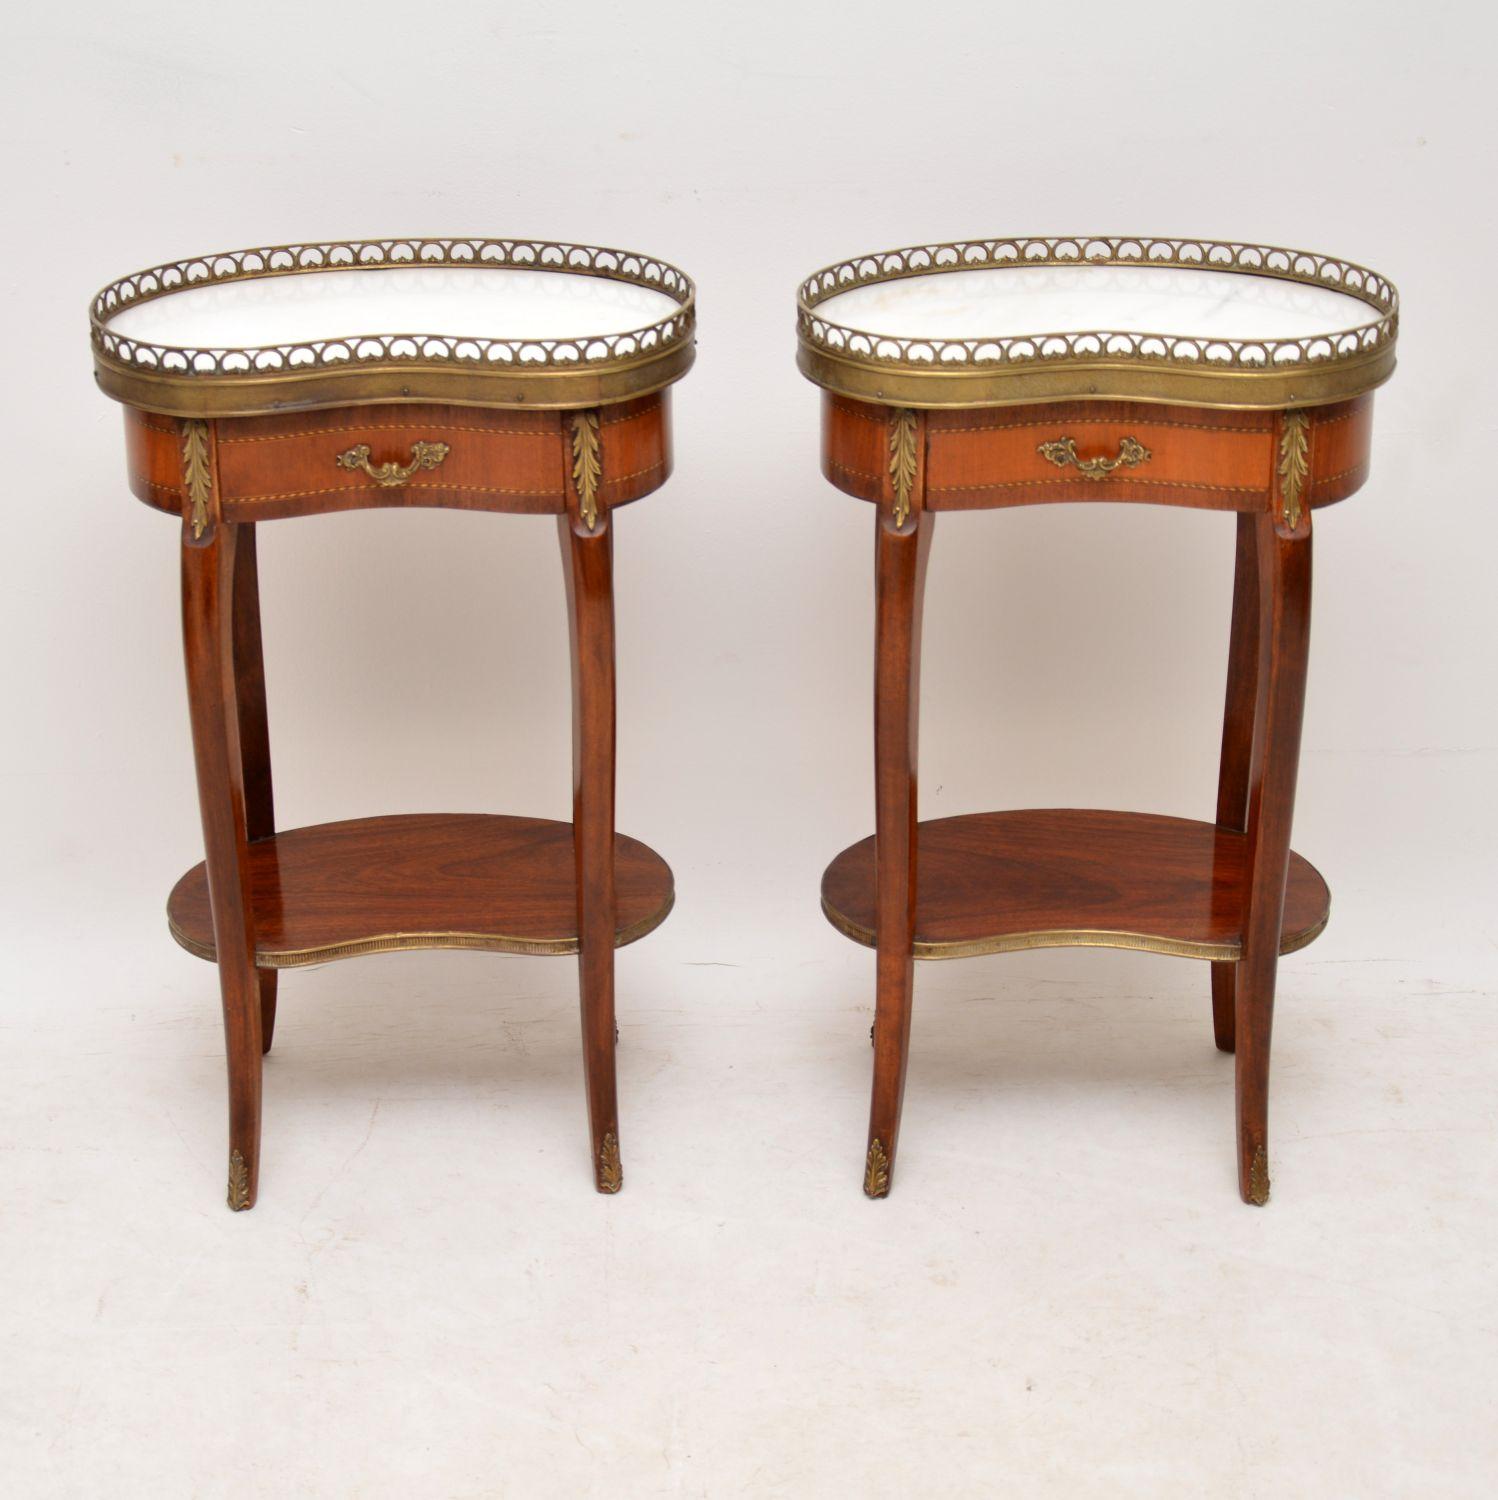 This very useful pair of antique French style kidney shaped tables would work well as lamp tables, side tables or even bedside tables. They are in very good original condition and date from circa 1930s period. The tops are marble, with pierced gilt